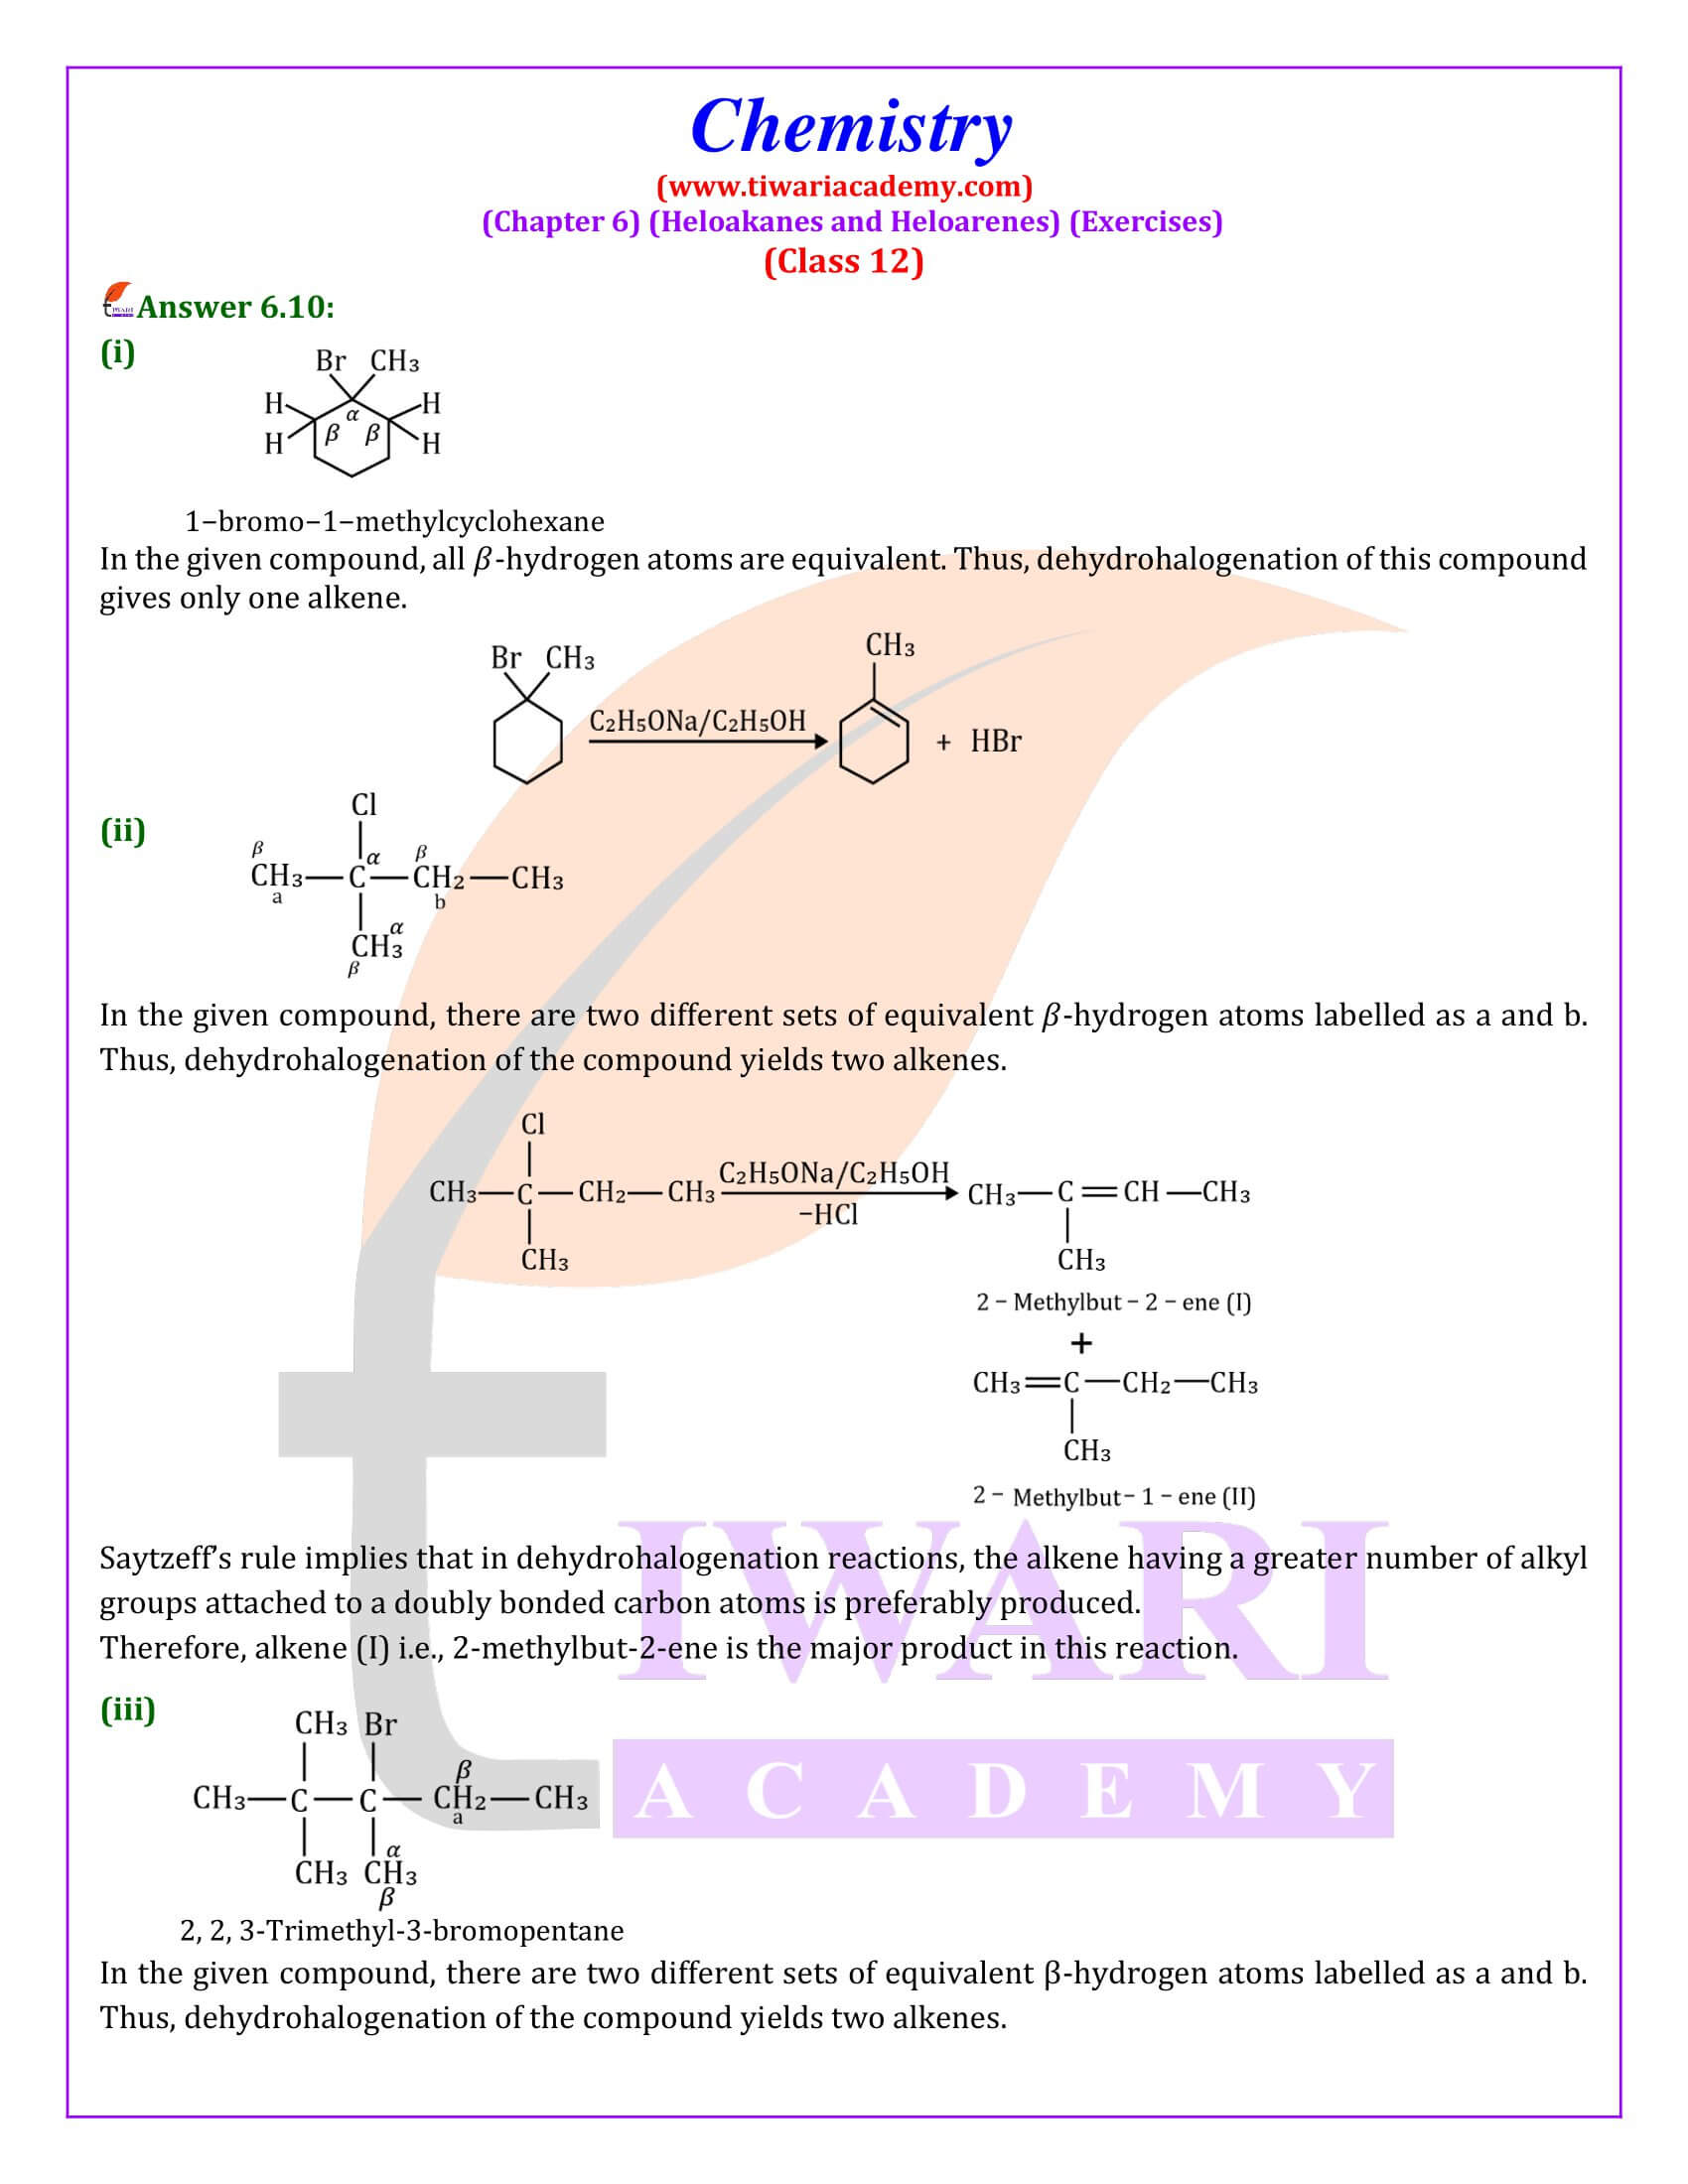 NCERT Solutions for Class 12 Chemistry Chapter 6 Exercises answers